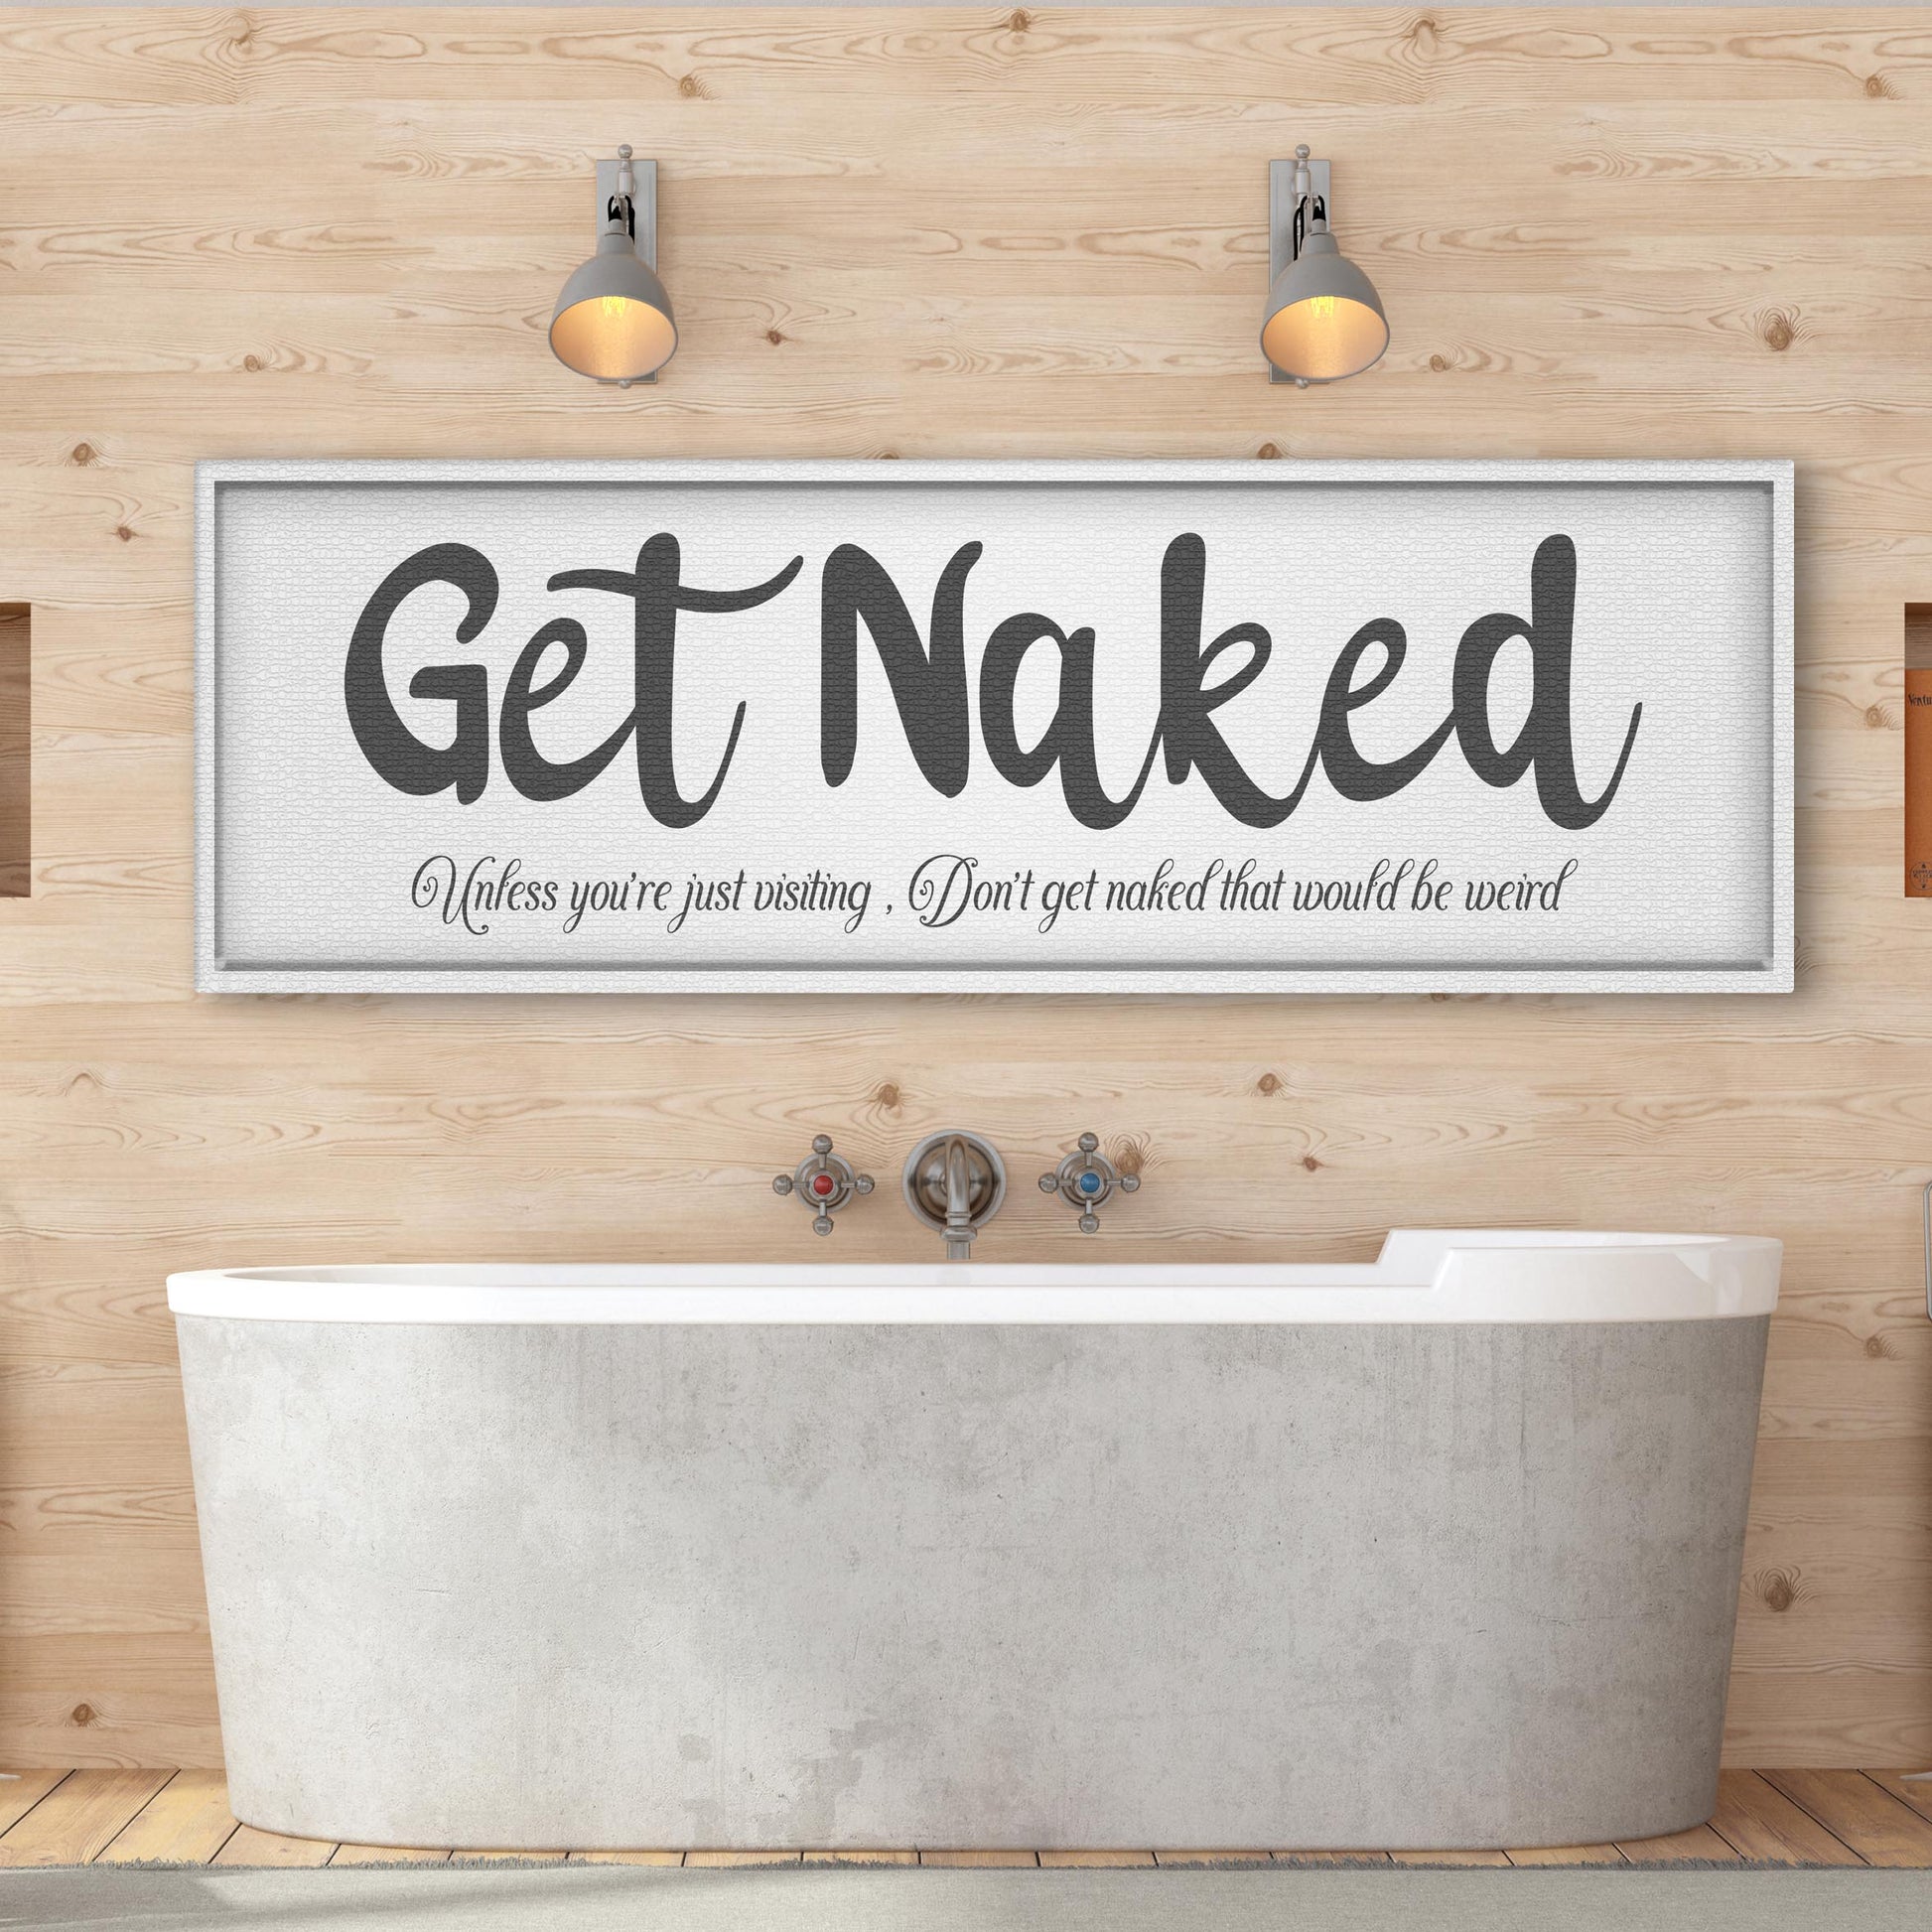 Get Naked Sign - Image by Tailored Canvases